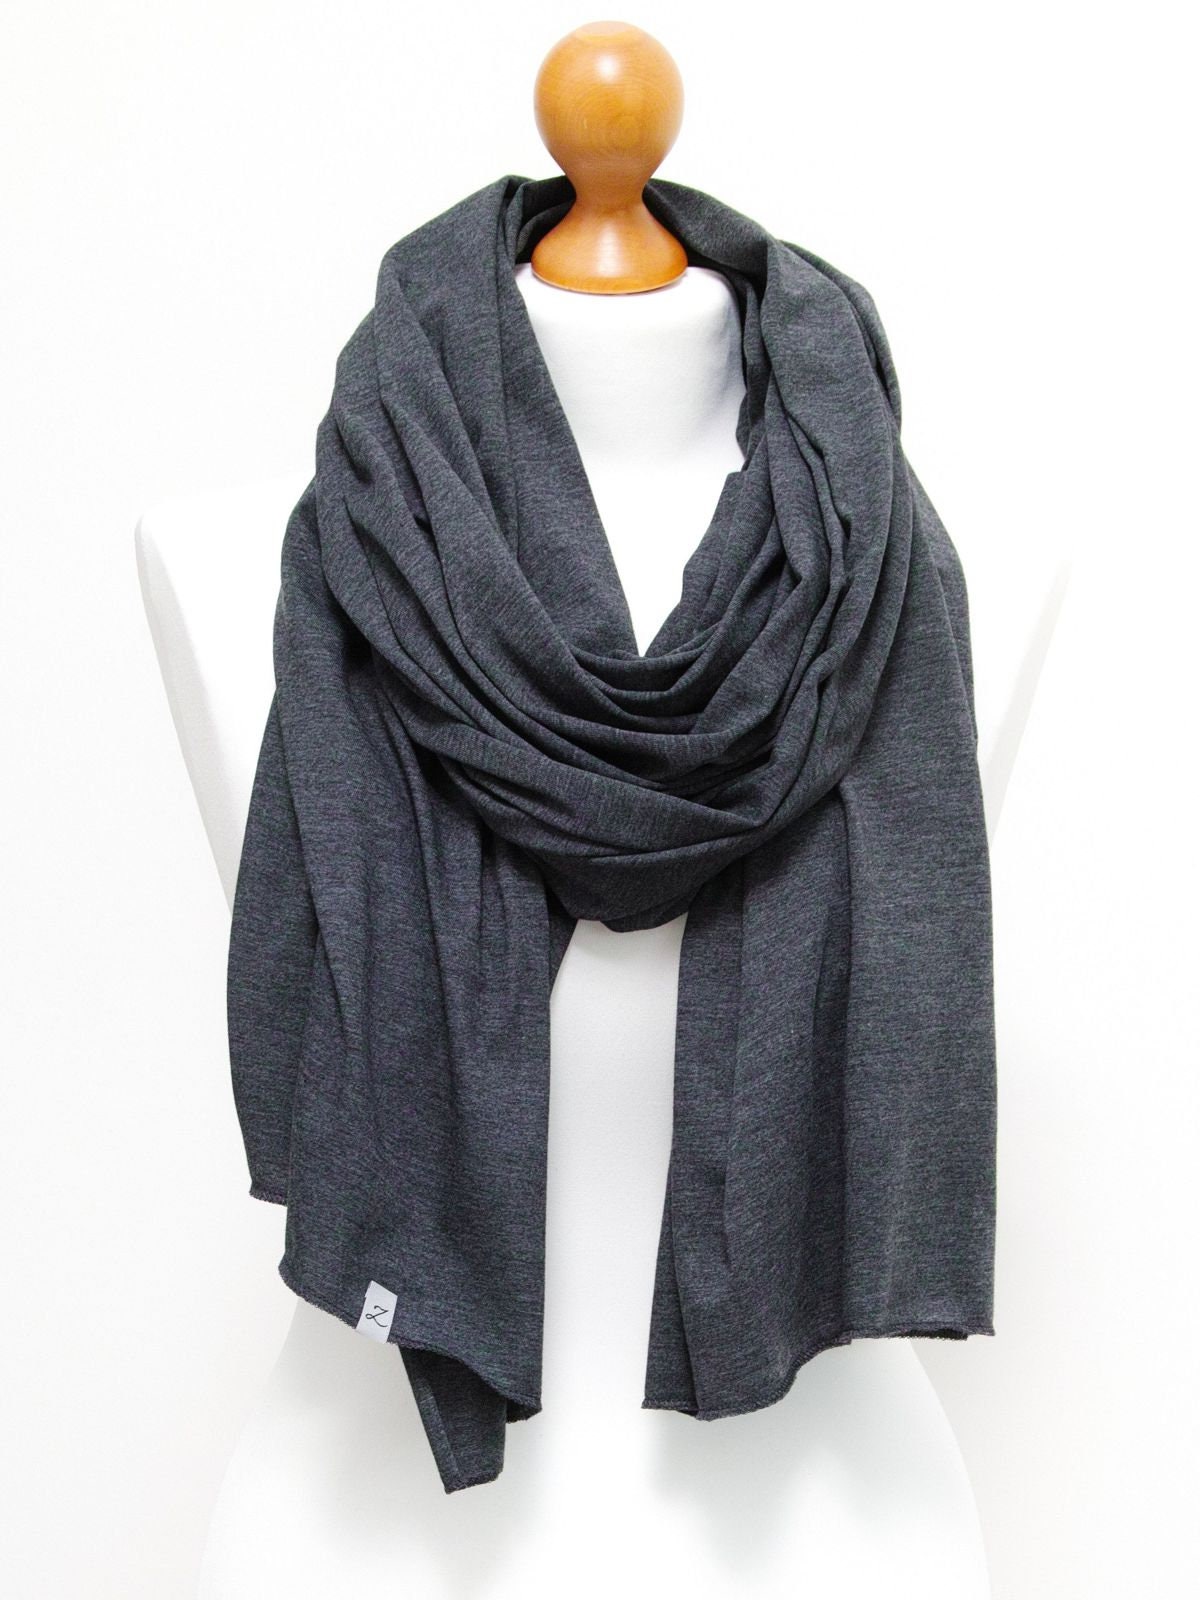 Cotton scarf shawl with leather strap, large cotton scarf shawl ...